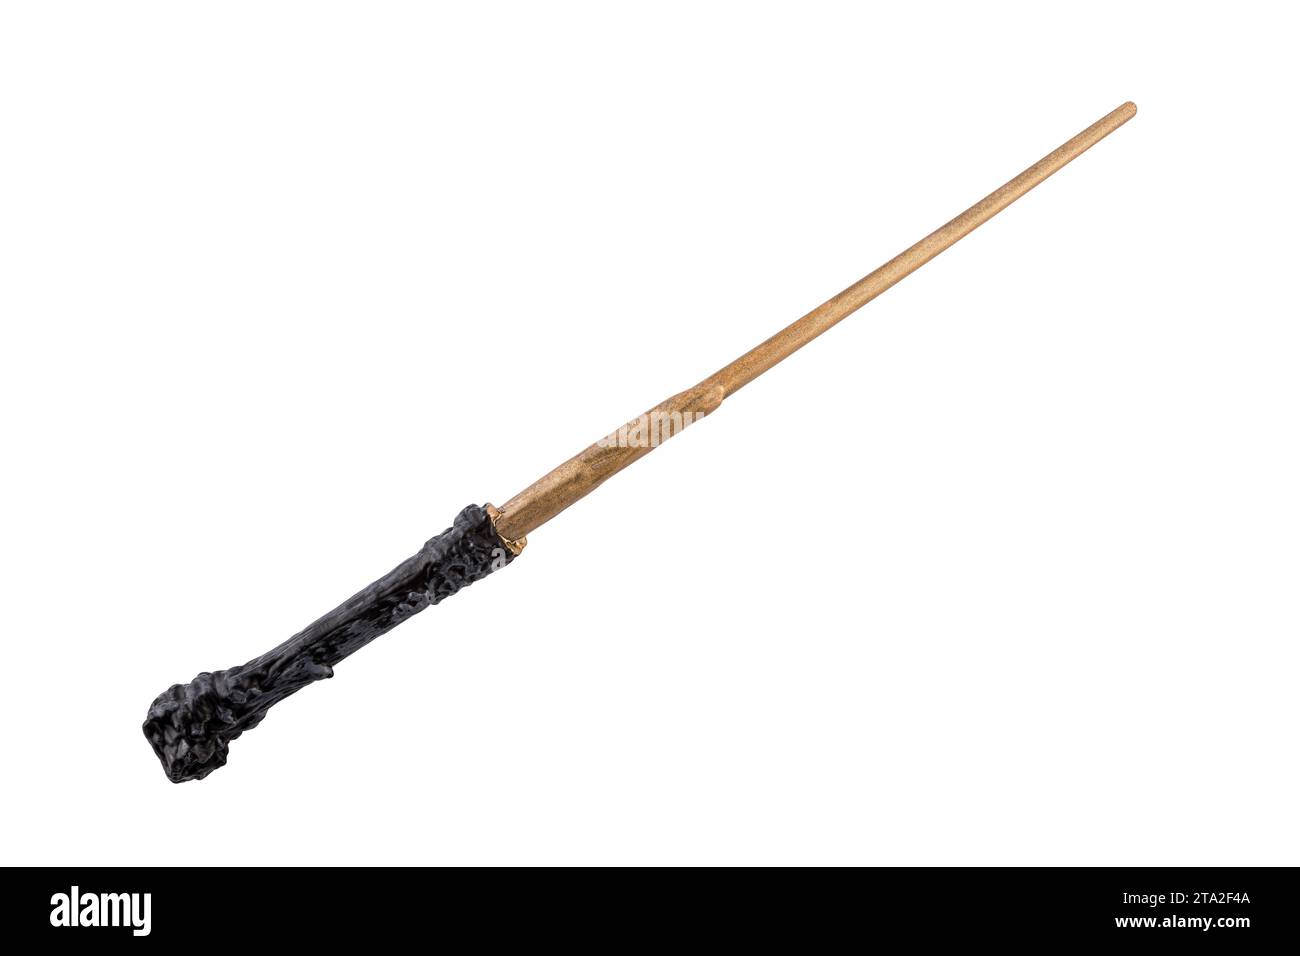 Golden magic wand isolated on white background with clipping path Stock Photo